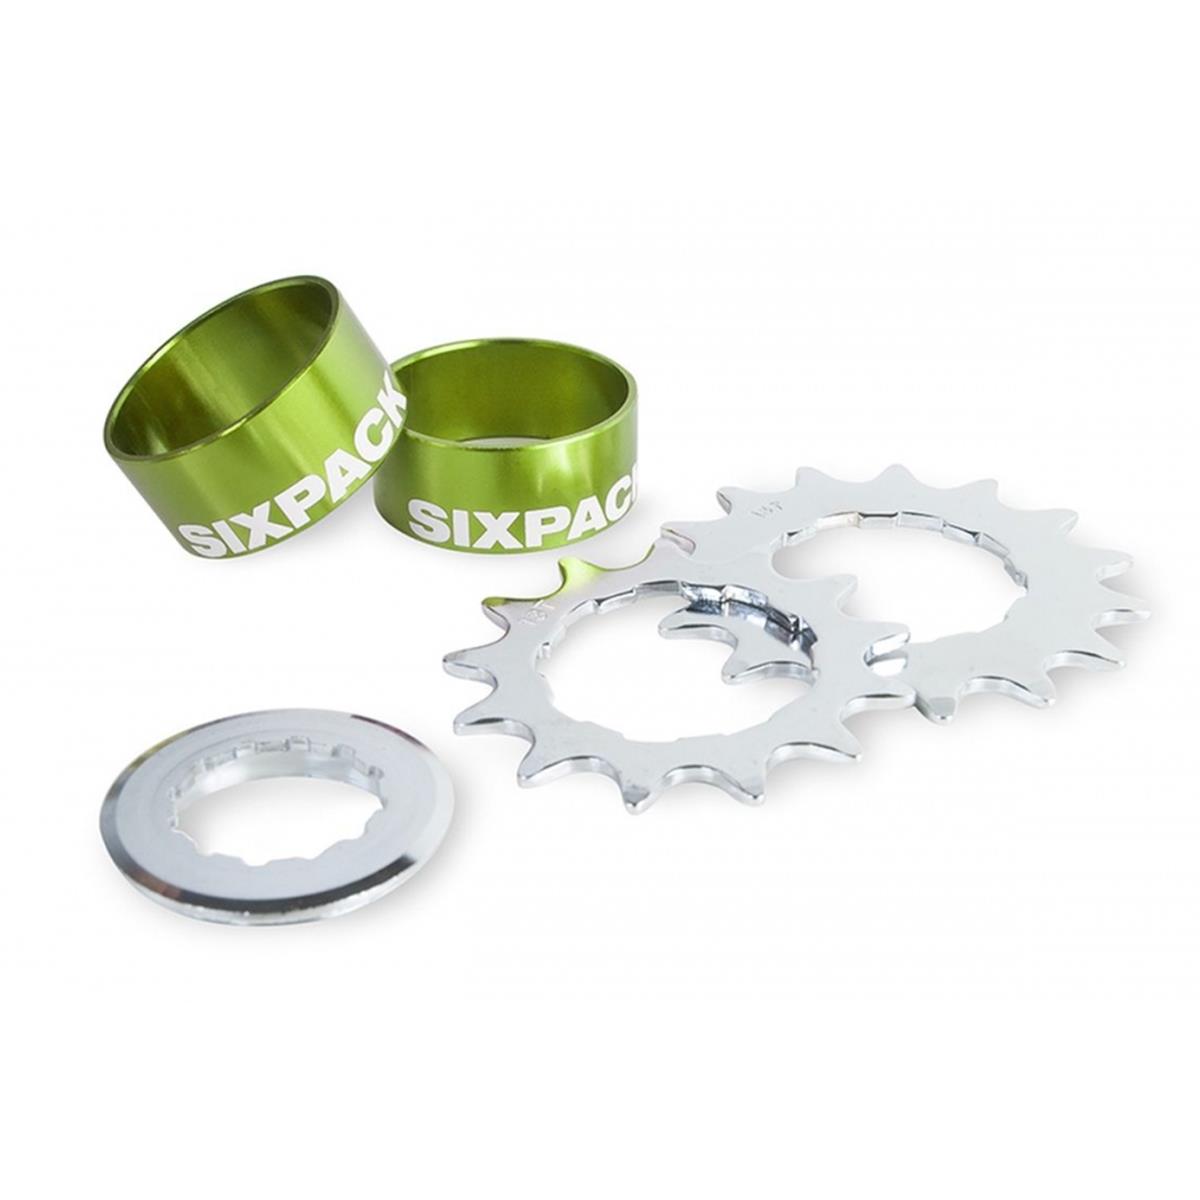 Sixpack Singlespeed Conversion Kit  Electric Green, incl. 2 Chainrings (13 & 15T), fits 8/9710-speed Shimano/Sram Freewheels